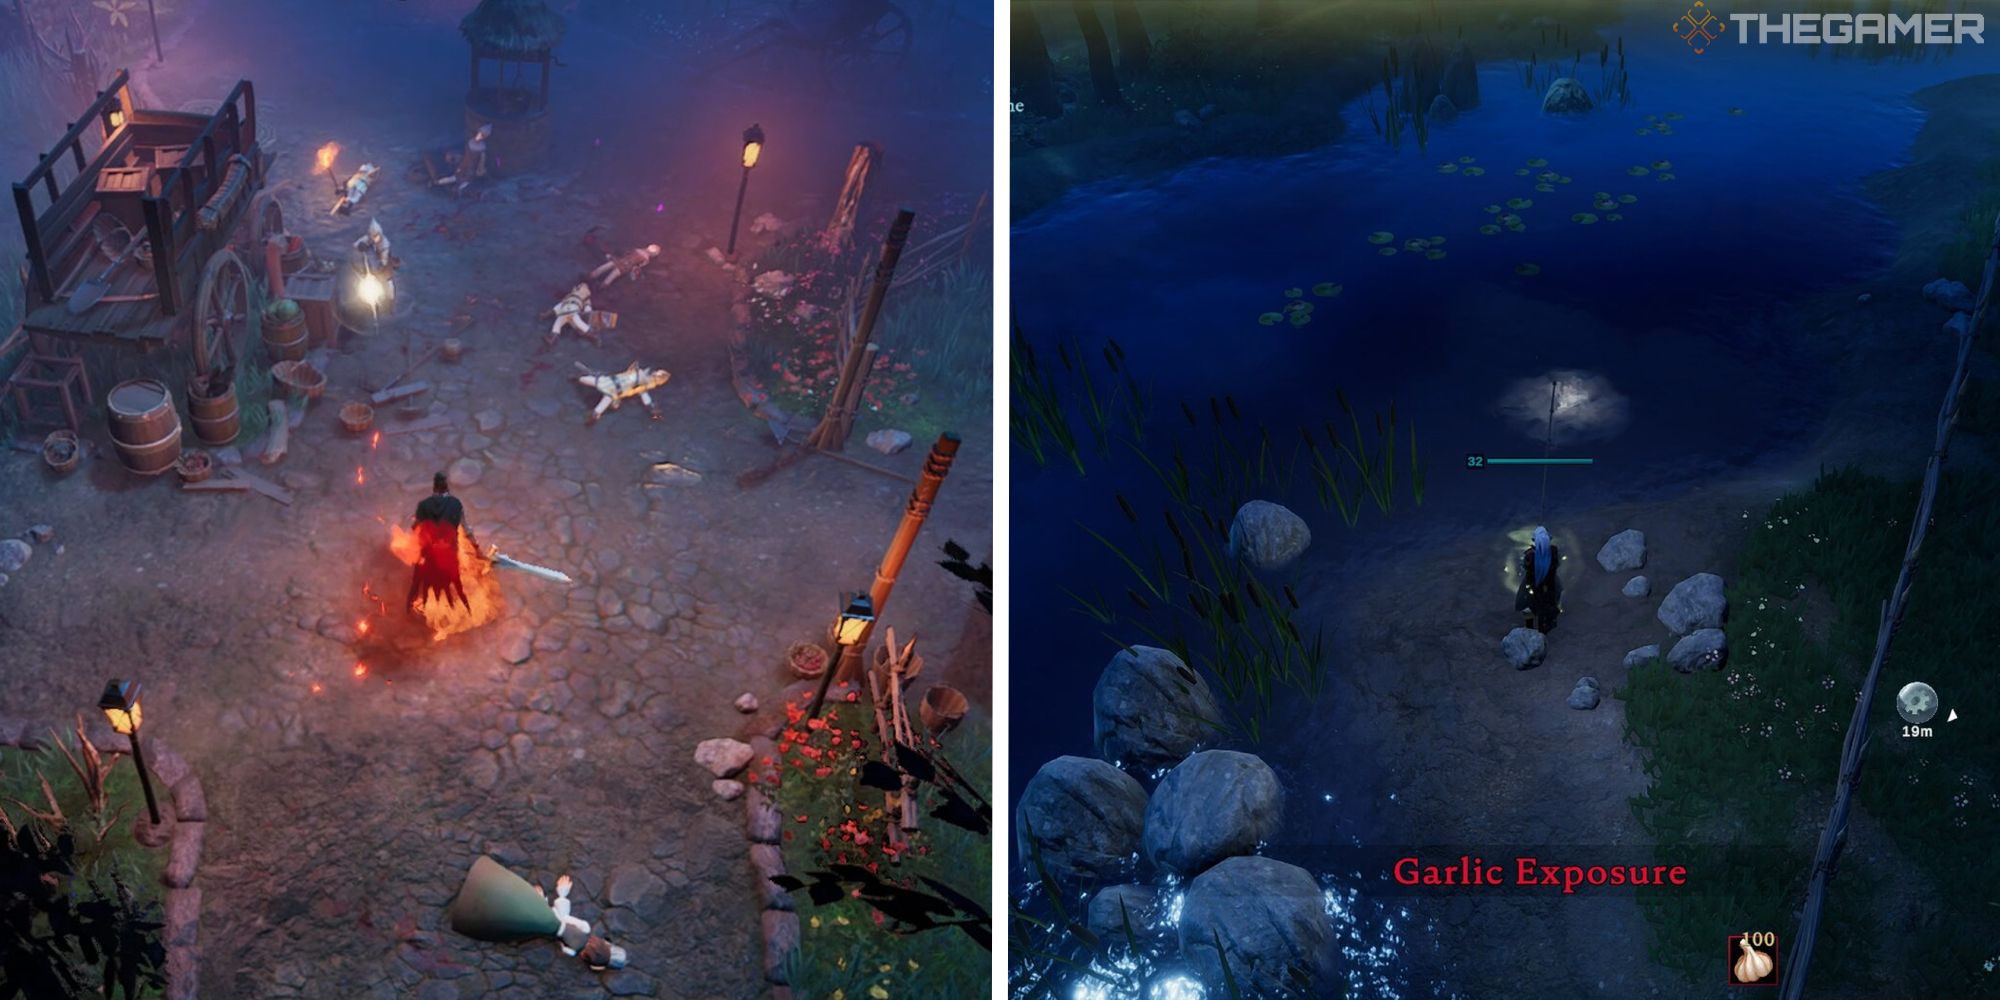 image of player in dawnbreak village next to image of player fishing with garlic exposure